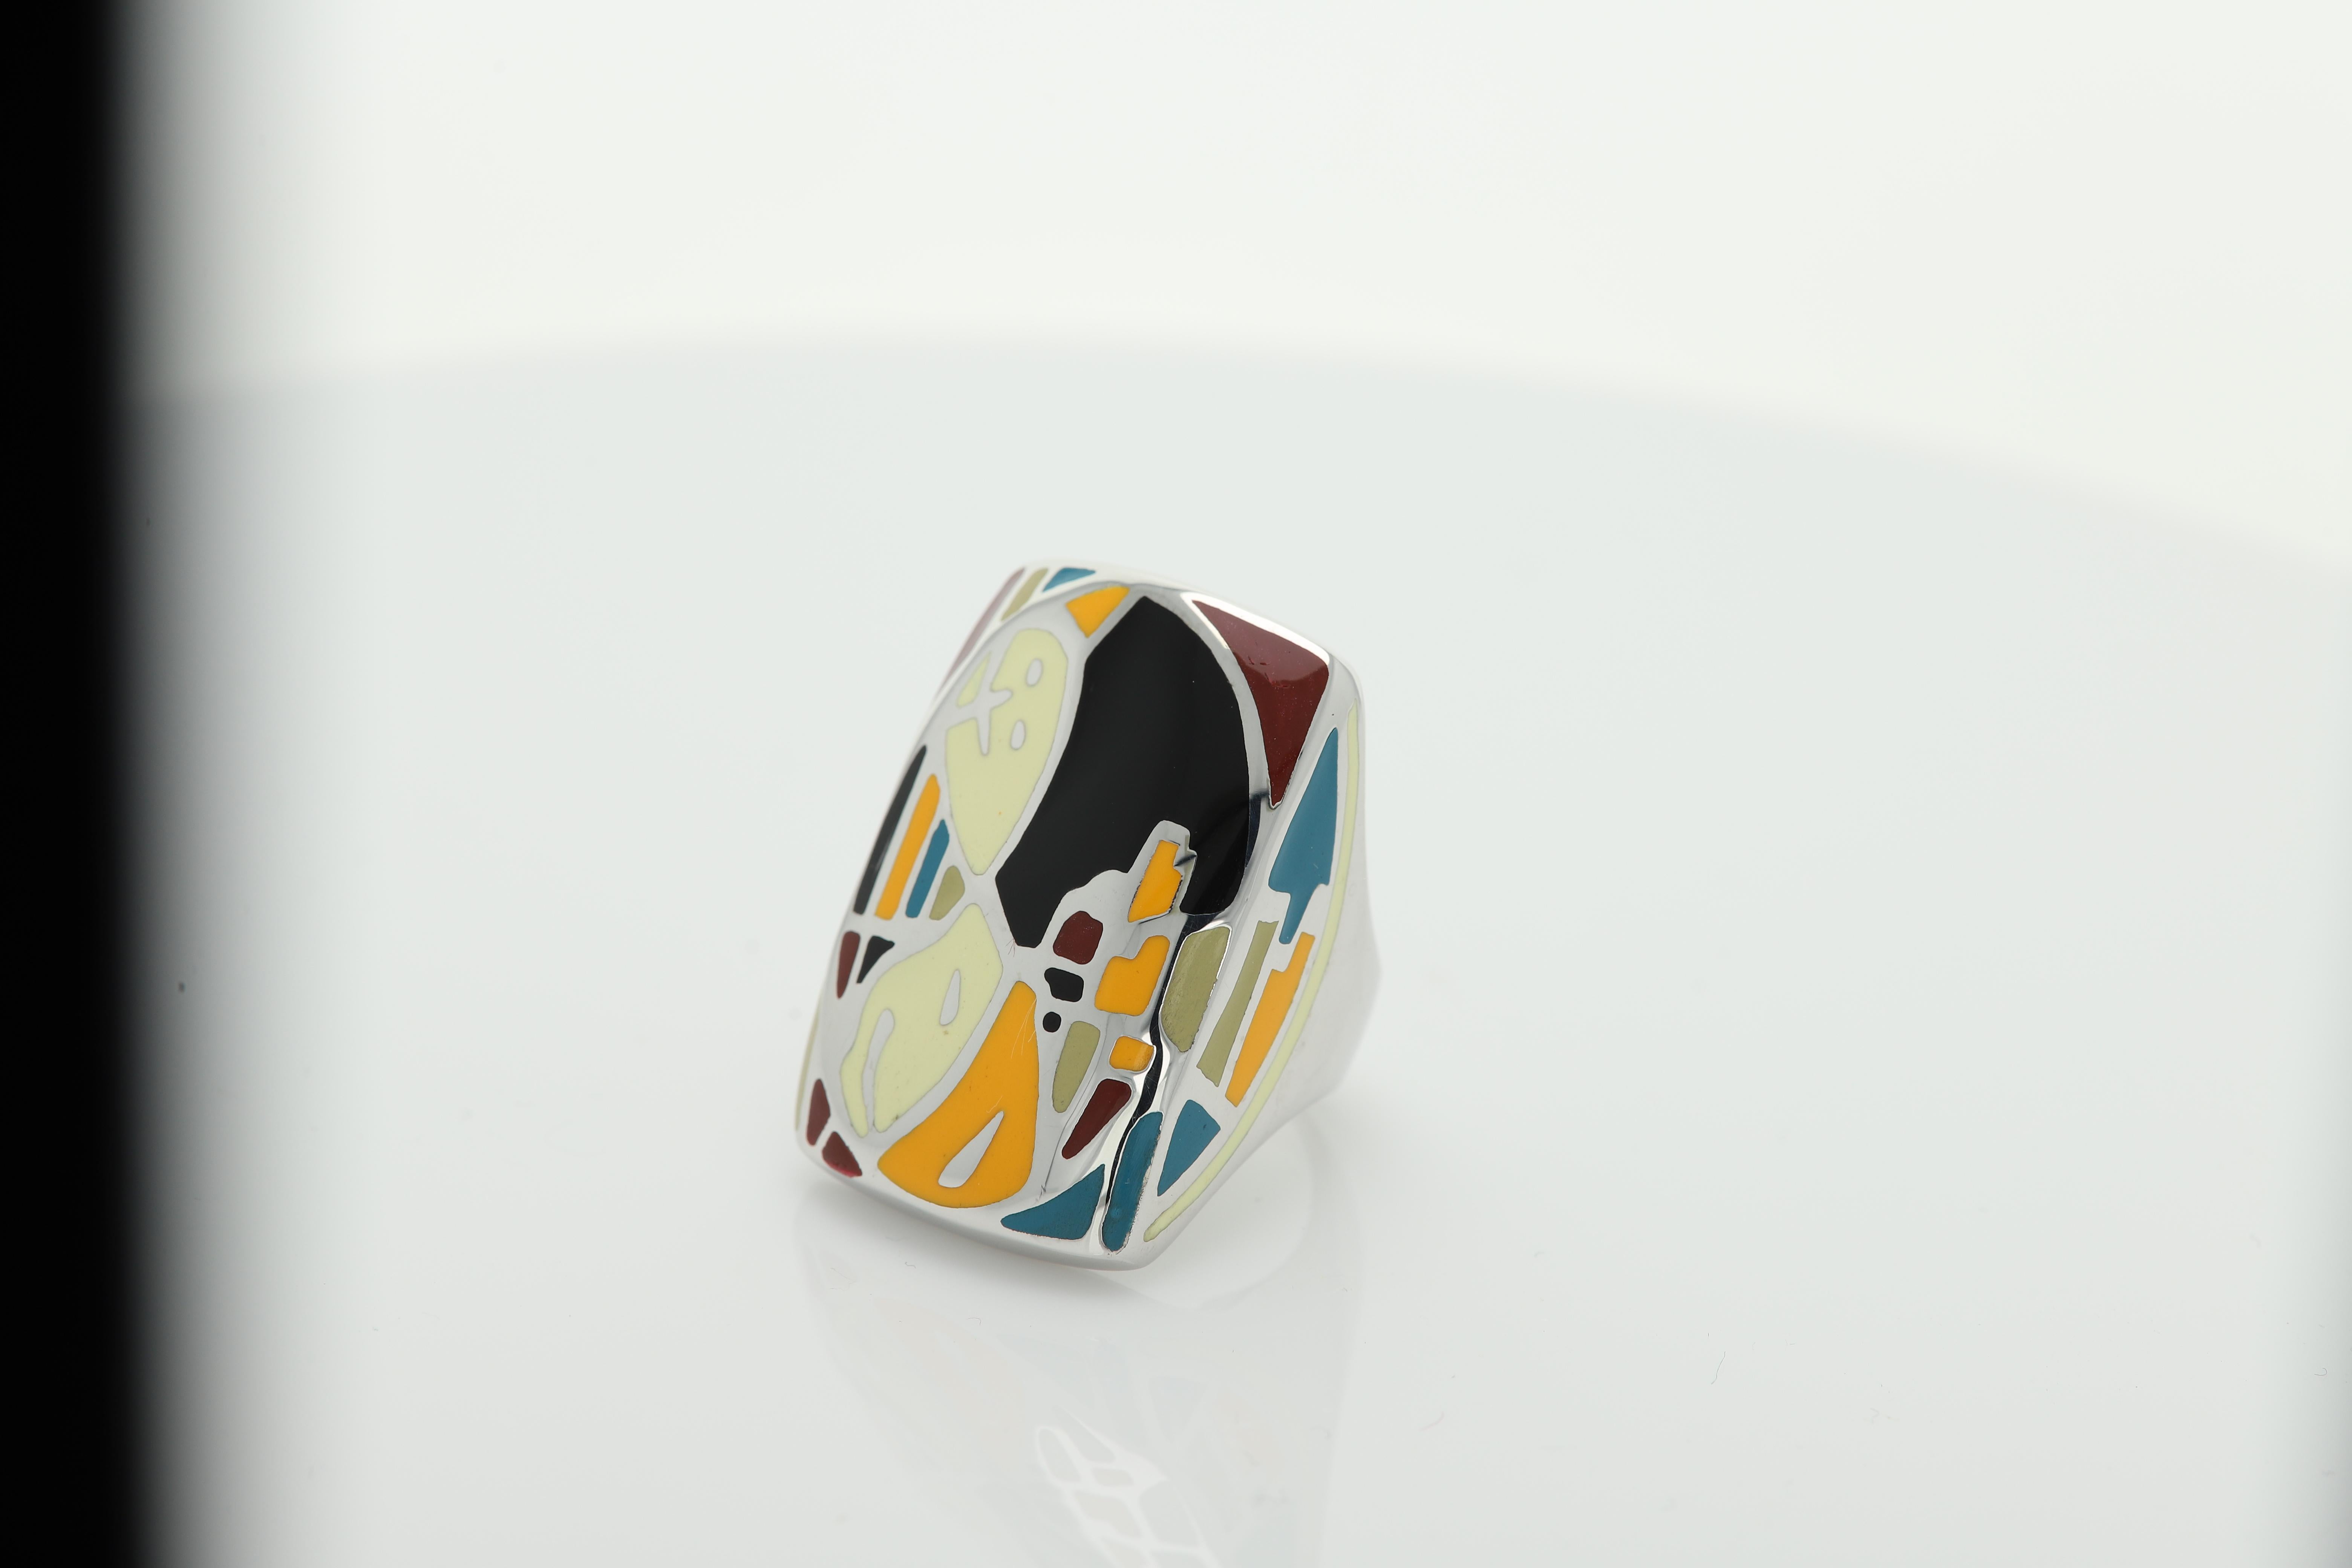 Enamel Artistic Art Ring Inspired by famous world artist sterling silver 925, hand made in Italy, finger size 6.25  (NOT RESIZABLE) please inquire about other sizes. Approx design area size:  30 X 20 ( 1.2' x 0.75'  INCH ) Slightly imperfections may